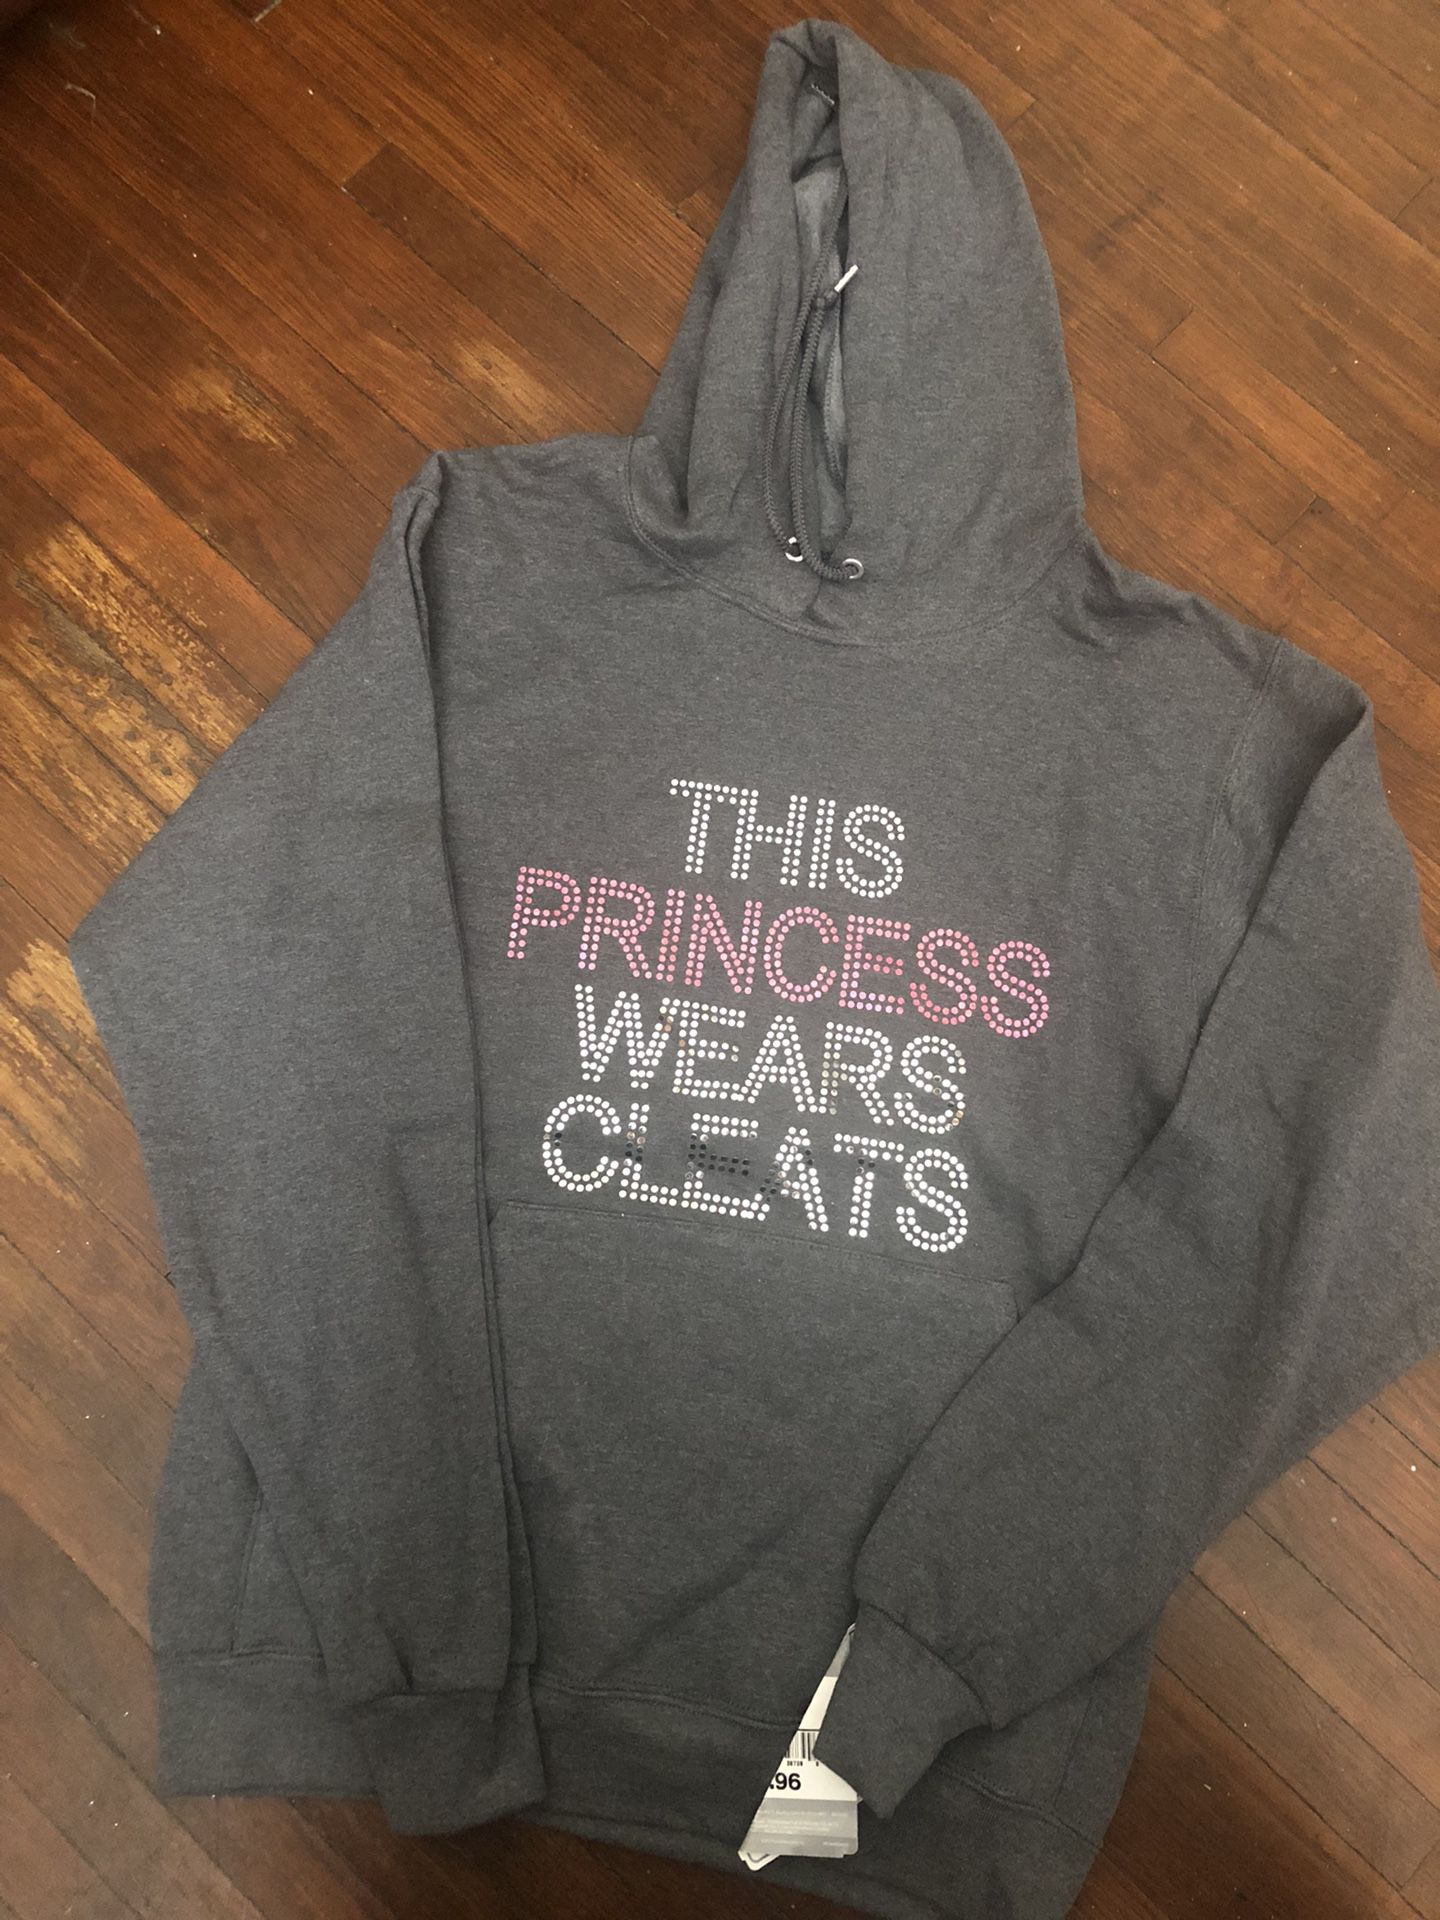 NET Girls Hoodie Size-Adult Large